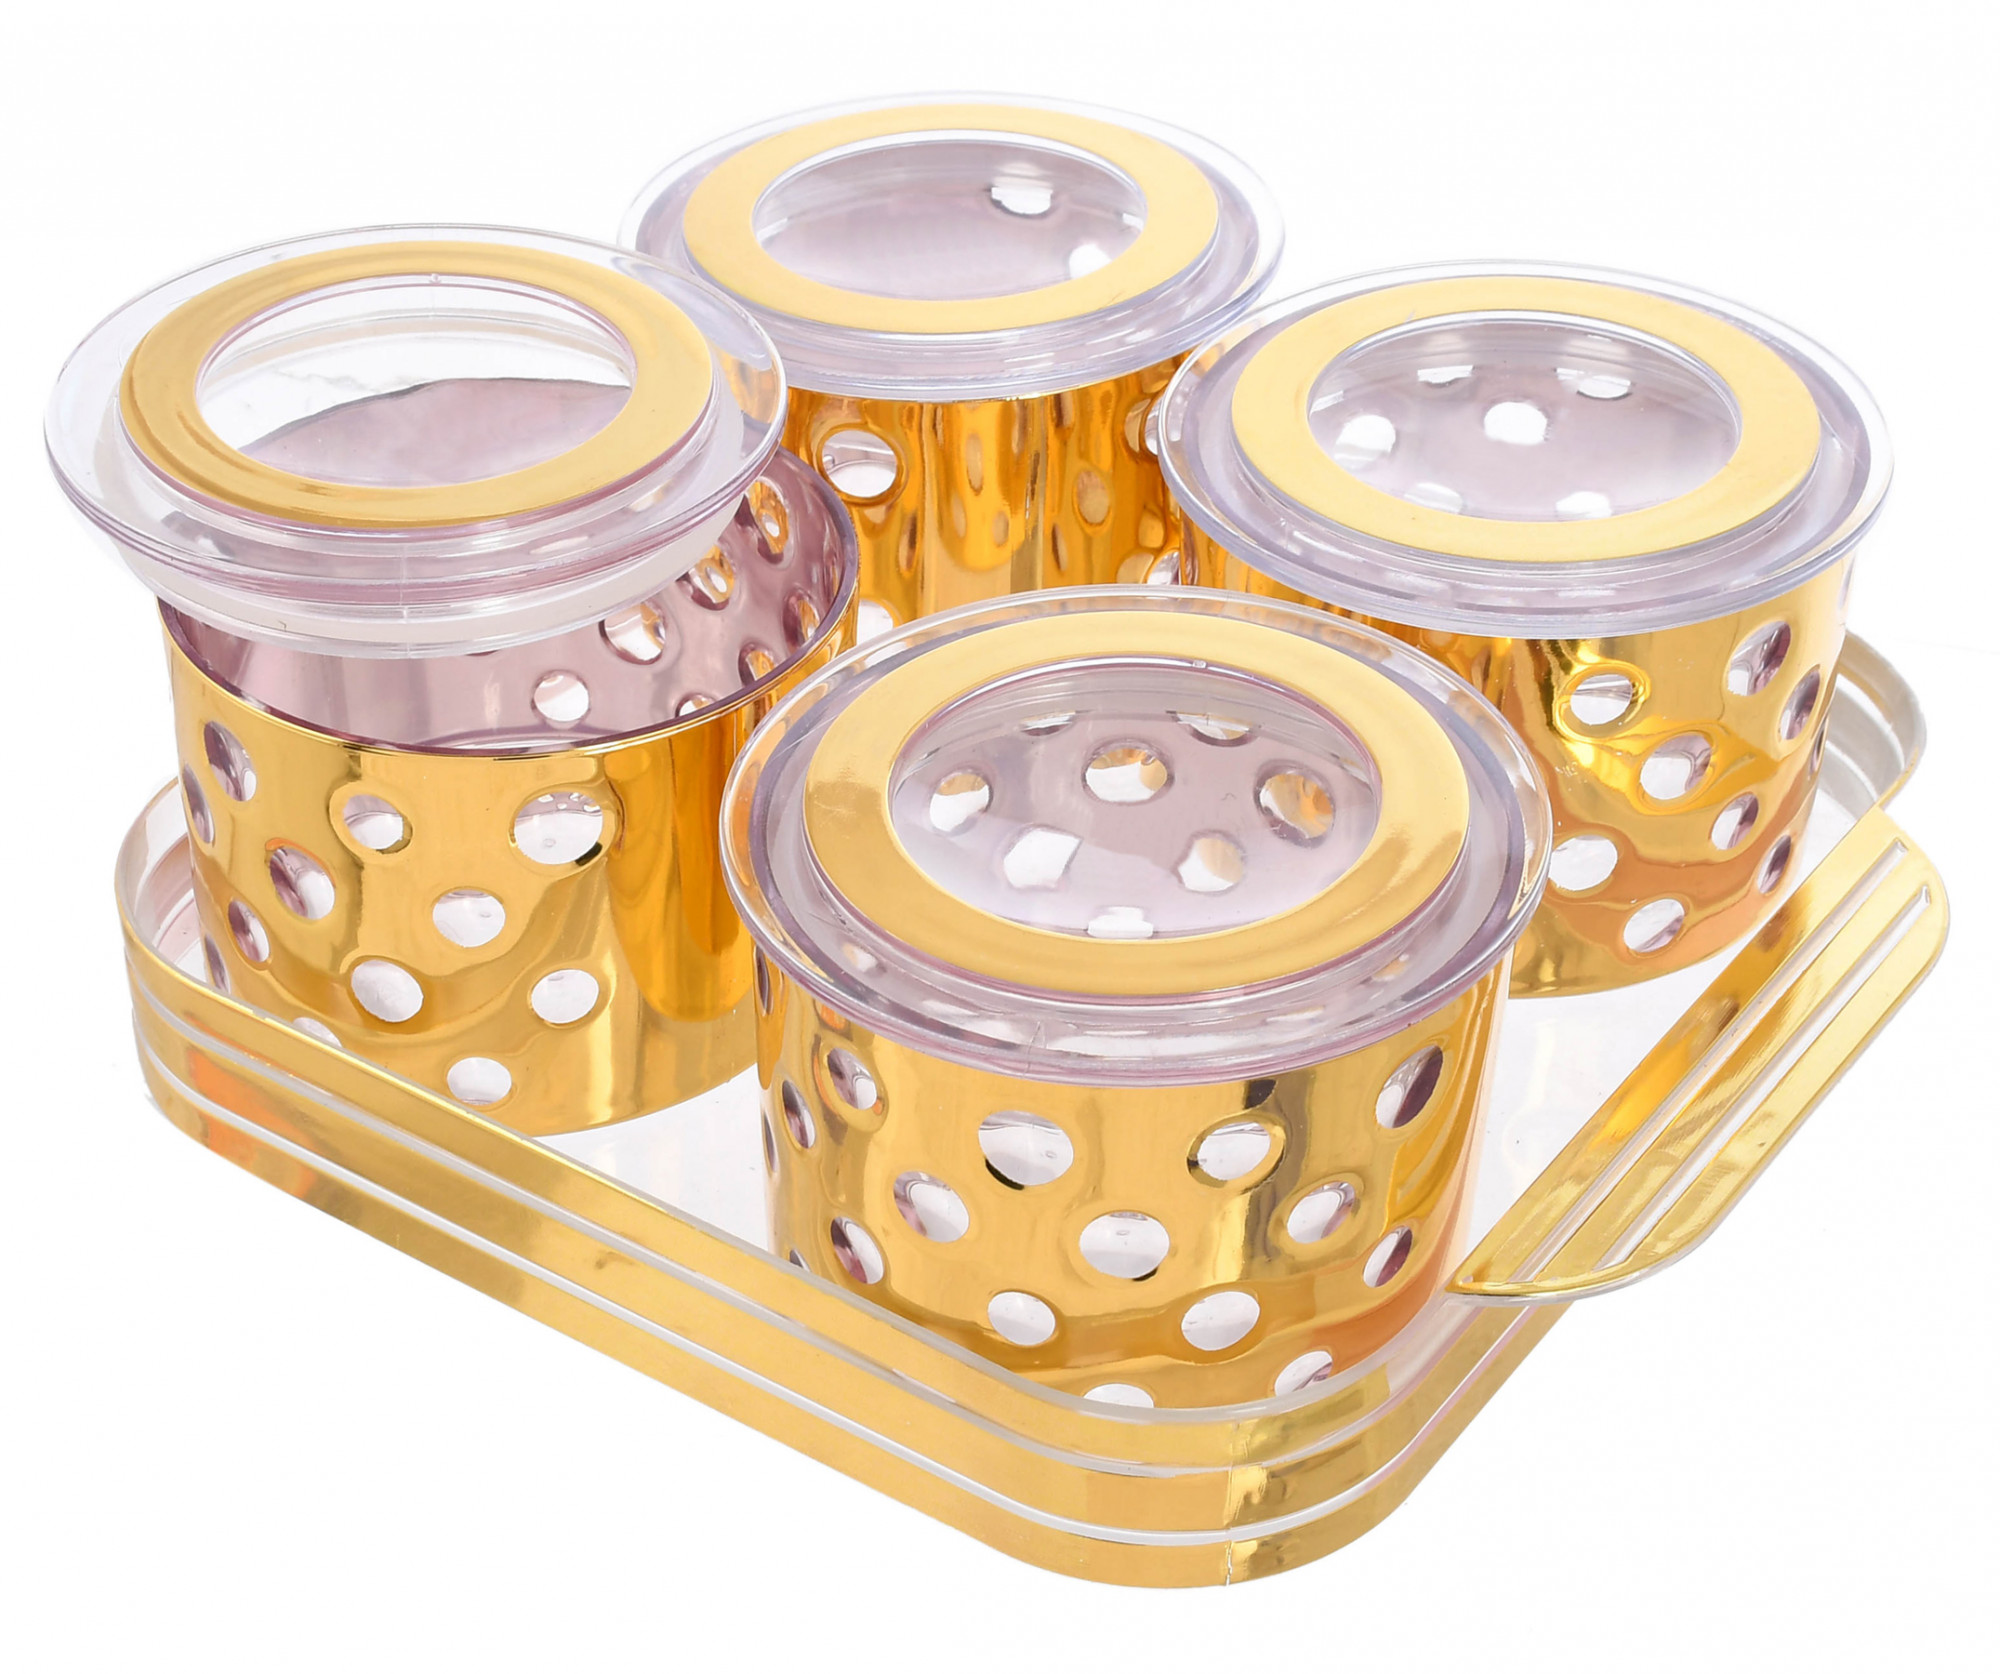 Kuber Industries Wooden Design Plastic Dry Fruits Nuts Snacks Storage Container Set With Serving Tray, Set of 5 (Gold)